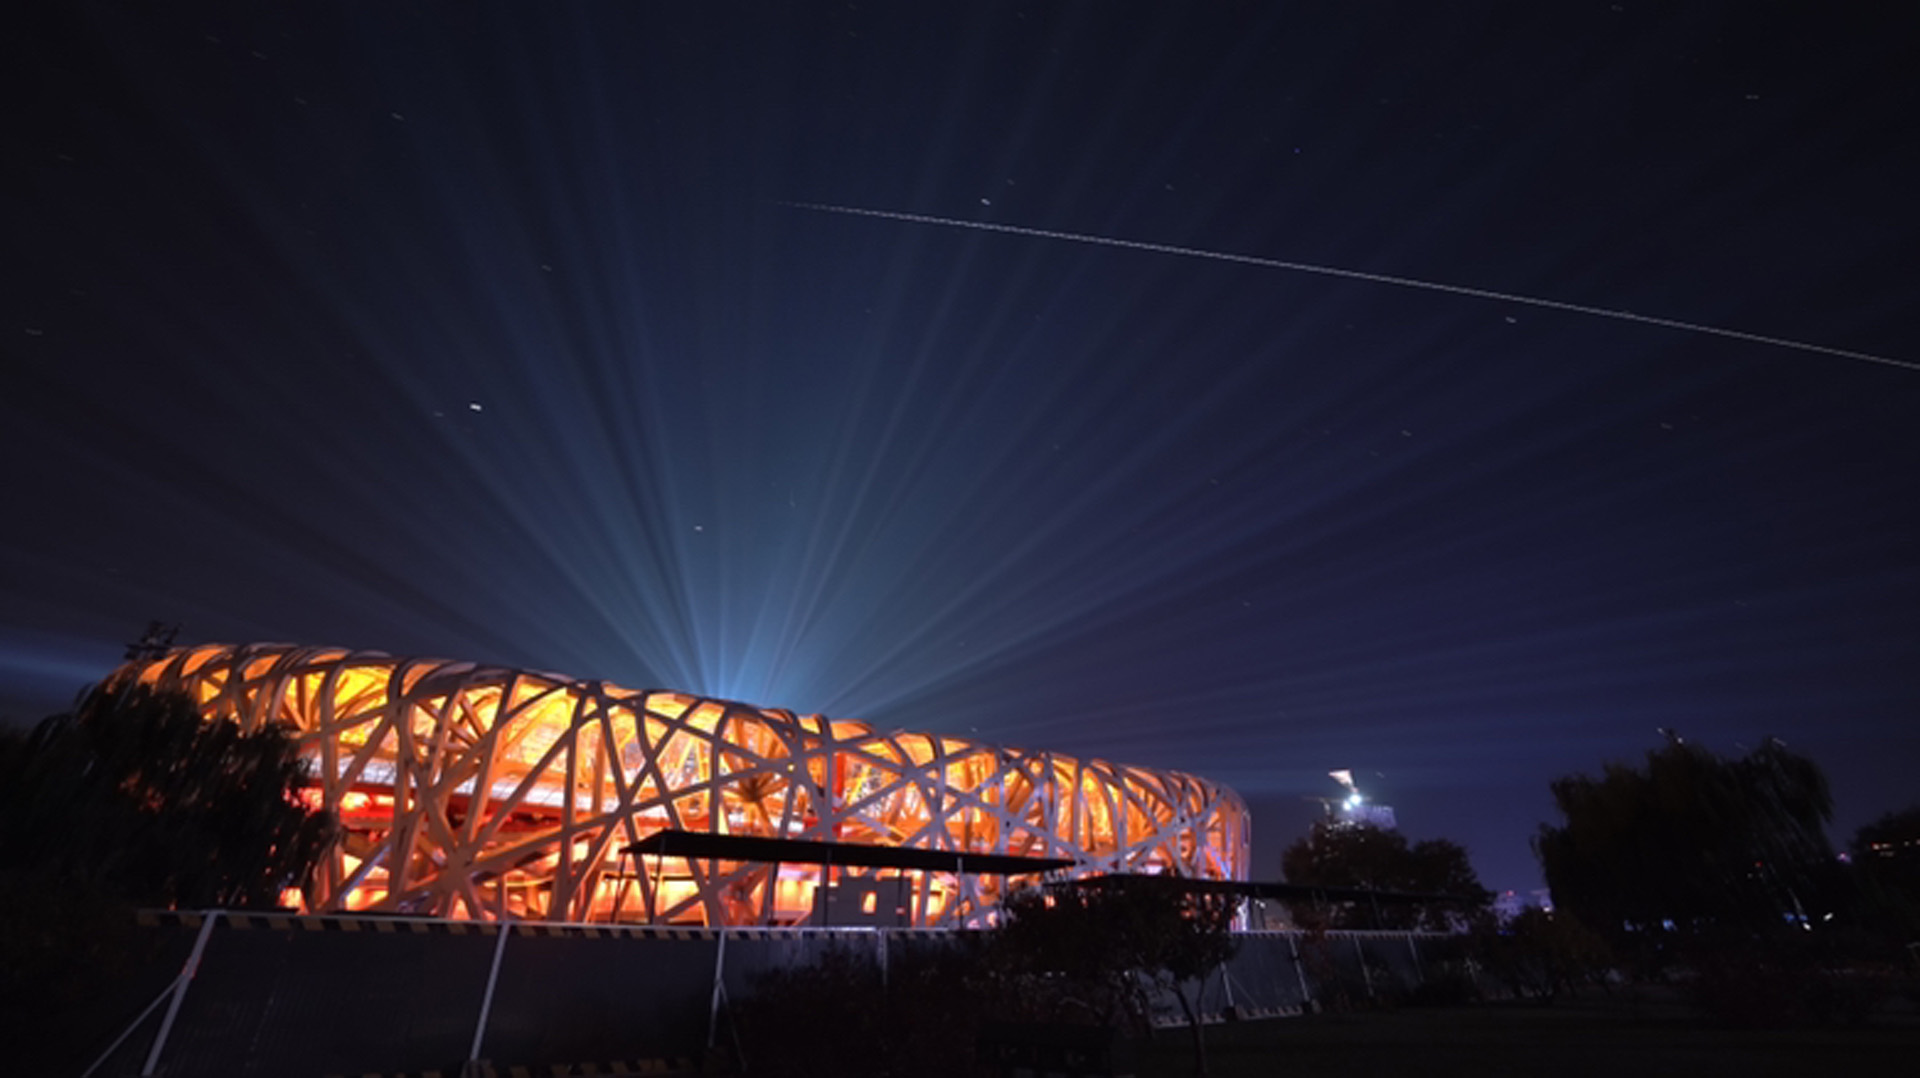 China's space station flies across the sky above National Stadium in Beijing, October 27, 2021. /Zhao Wei